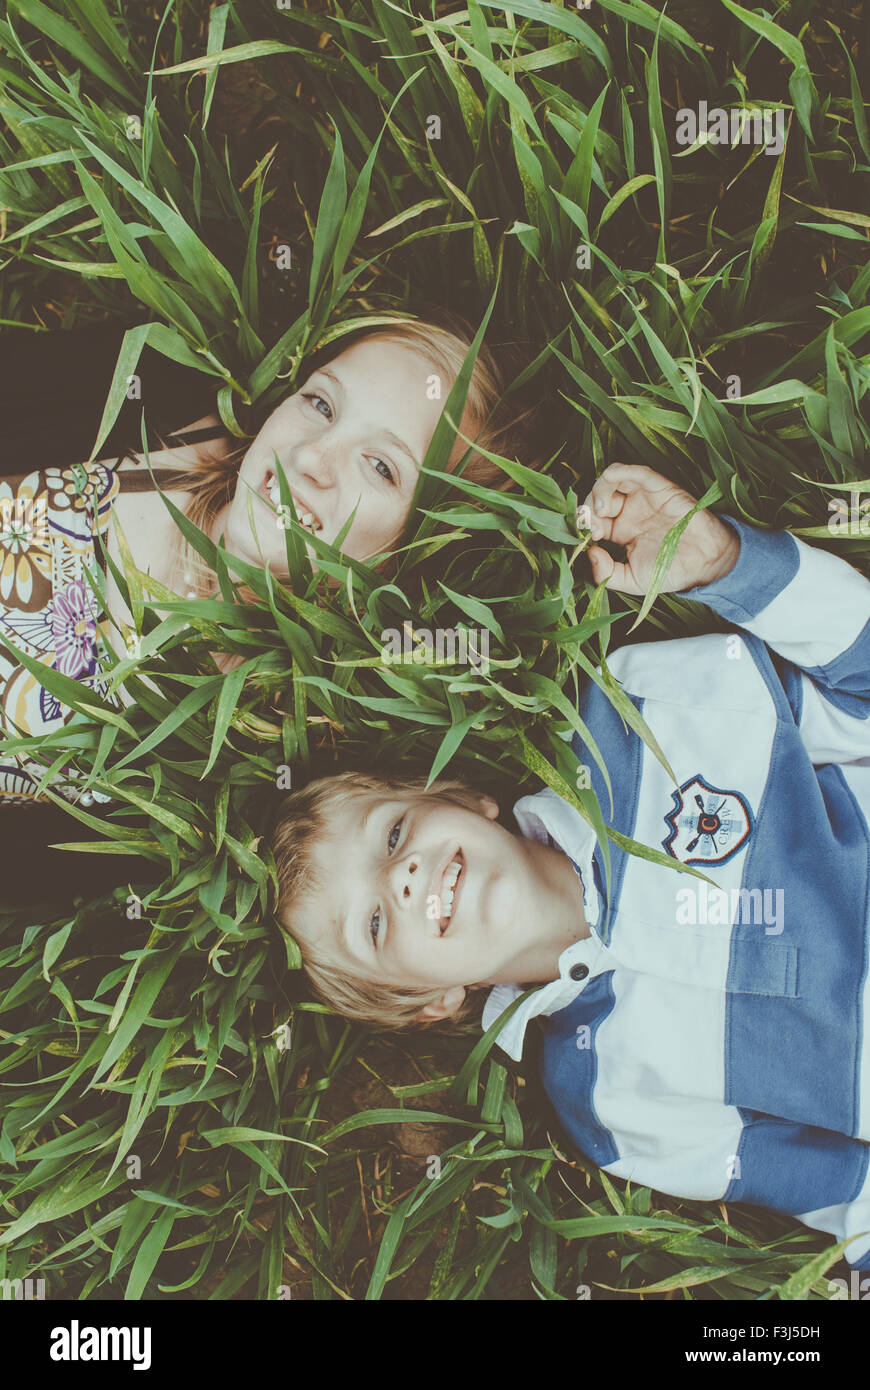 Two young children playing in a field Stock Photo